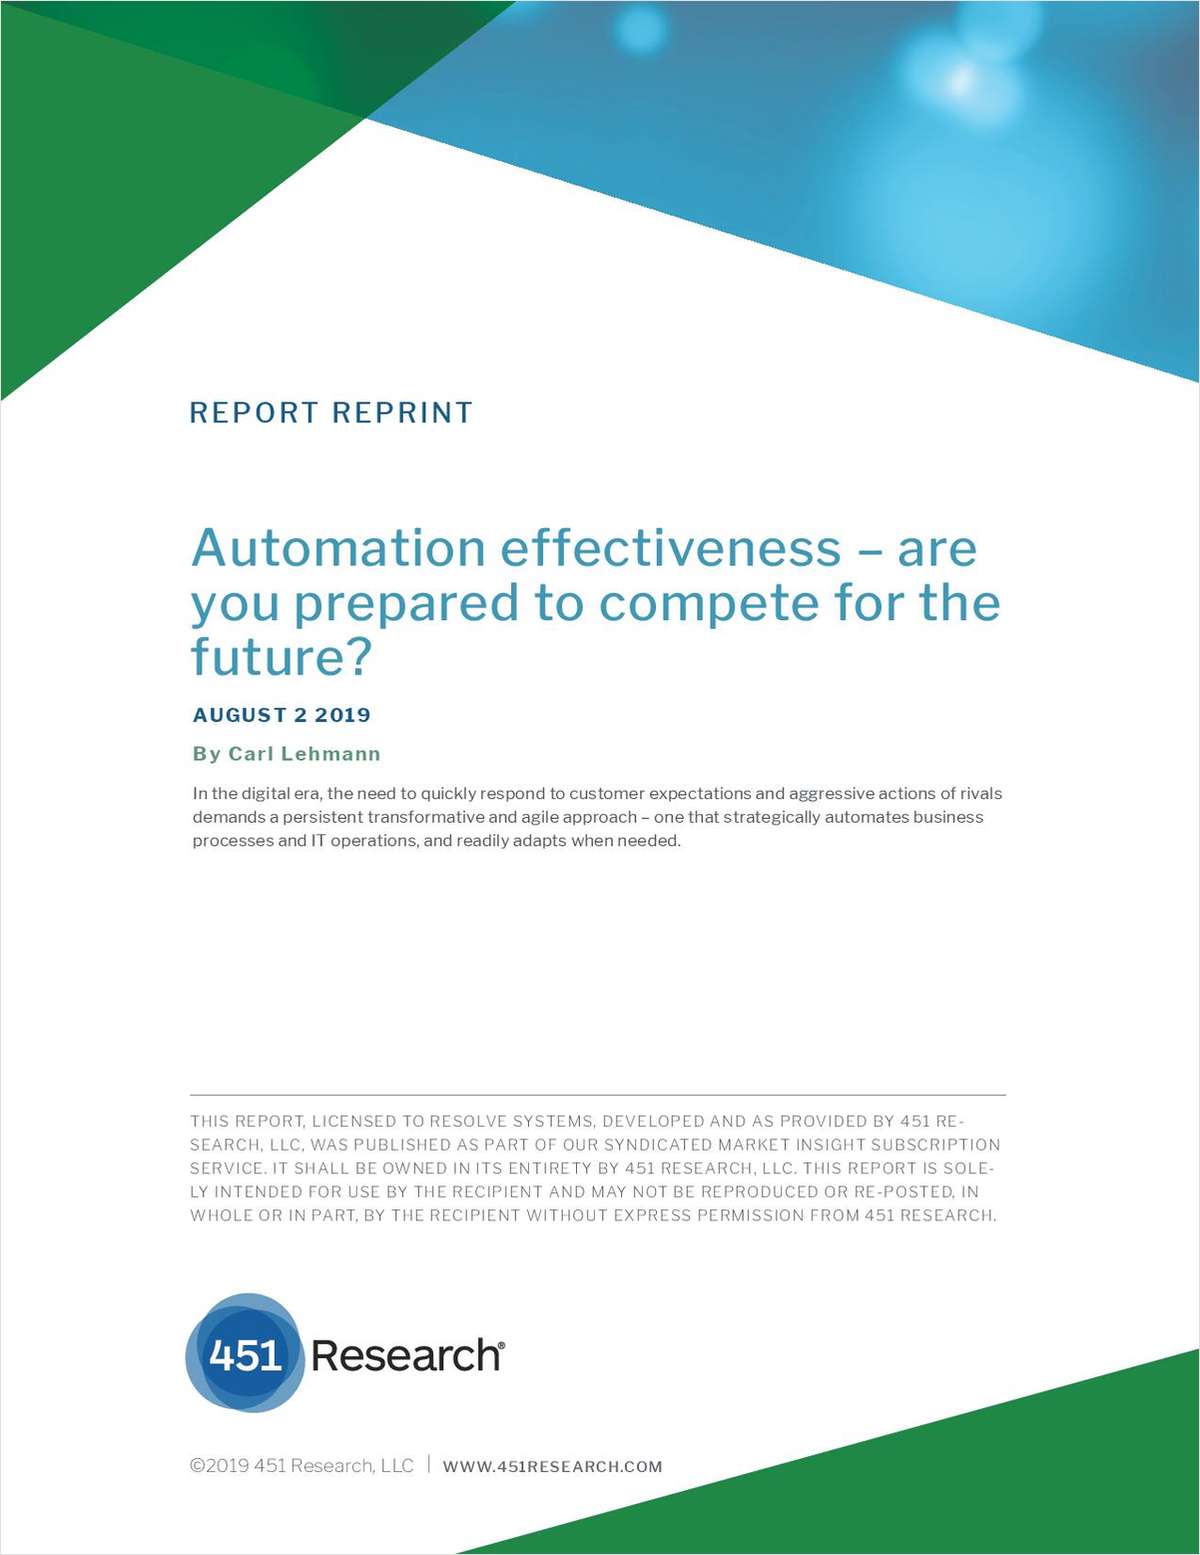 IT Automation effectiveness - are you prepared to compete for the future?